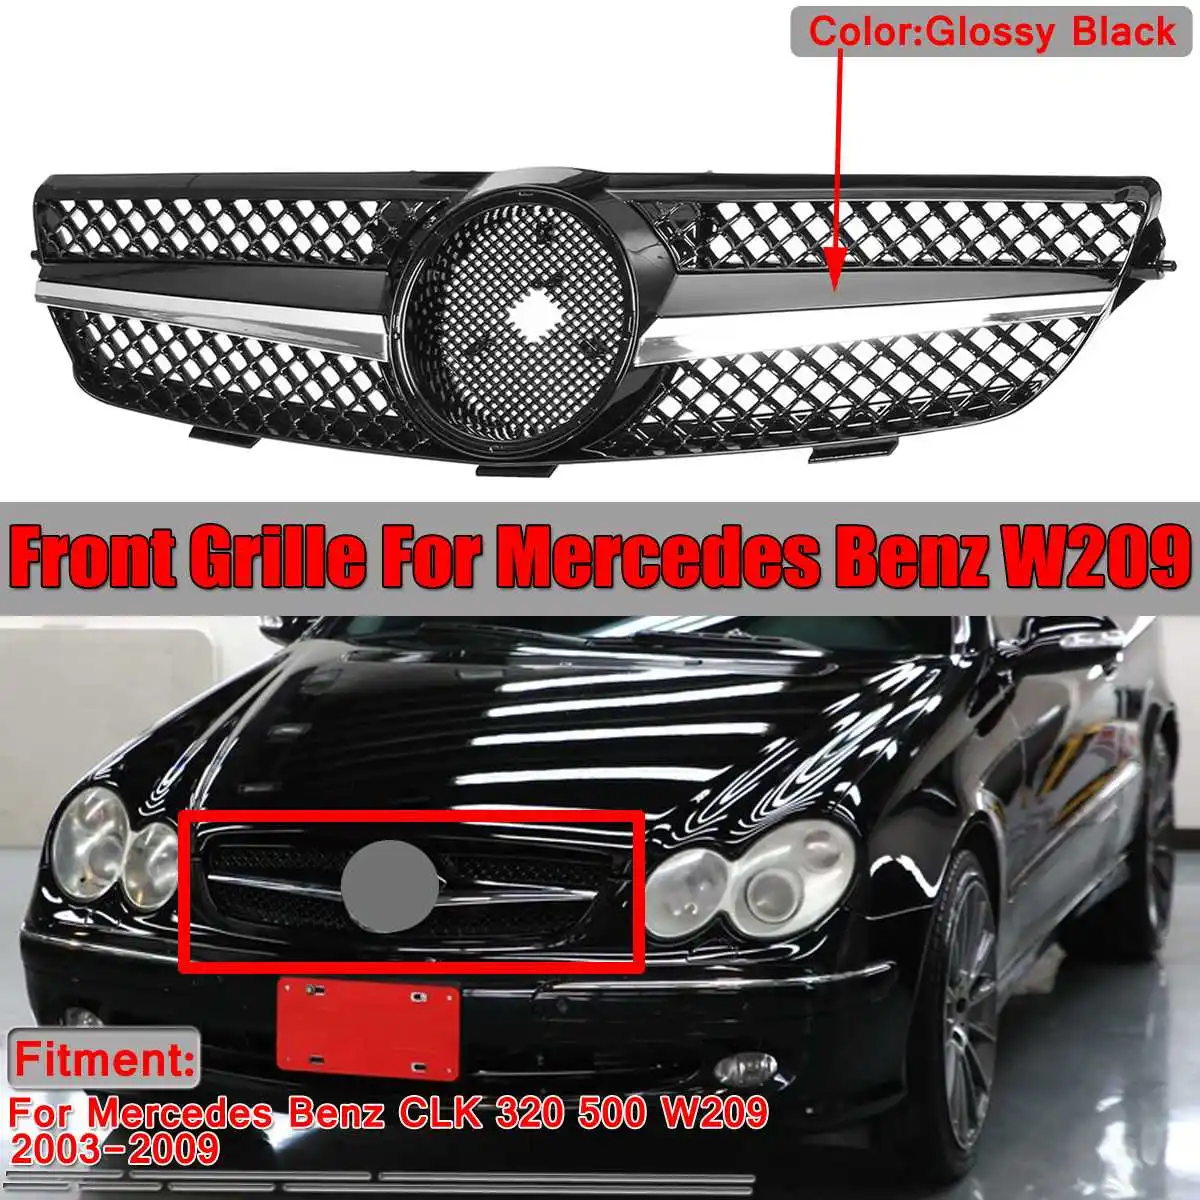 

New Black W209 Car Front Bumper Grille Grill For Mercedes For Benz CLK Class 320 500 W209 2003 2004 2005-2009 Racing Grills